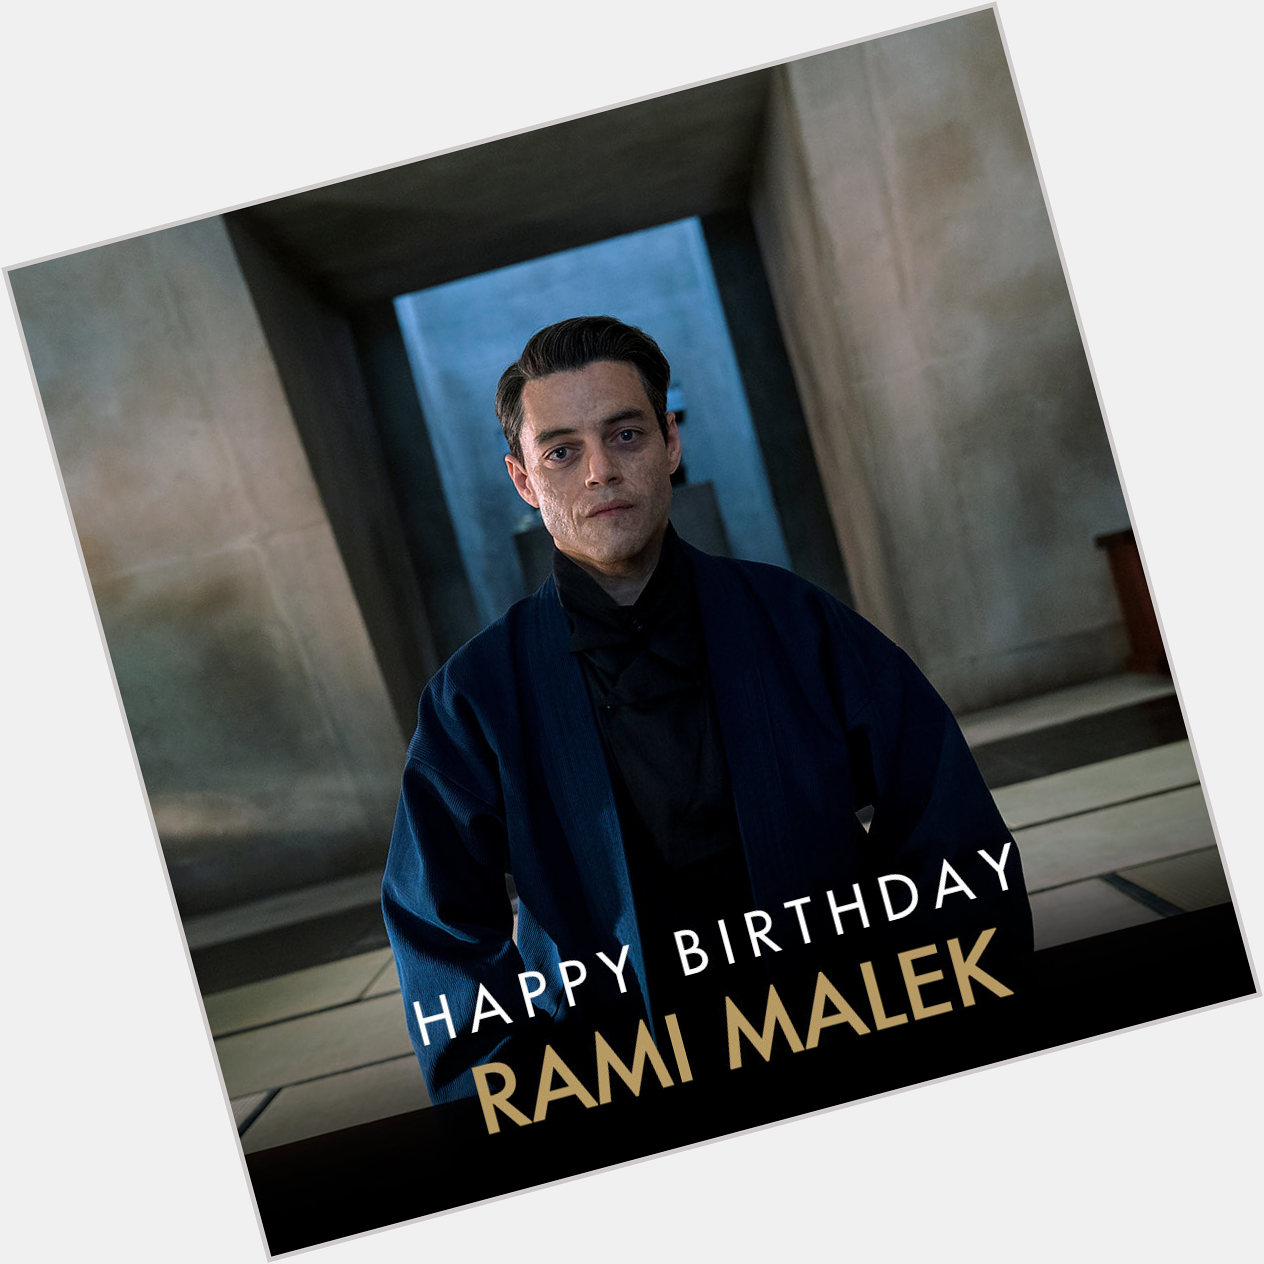 Happy Birthday to one of the most talented actors Rami Malek. 

Can\t wait to see you in 